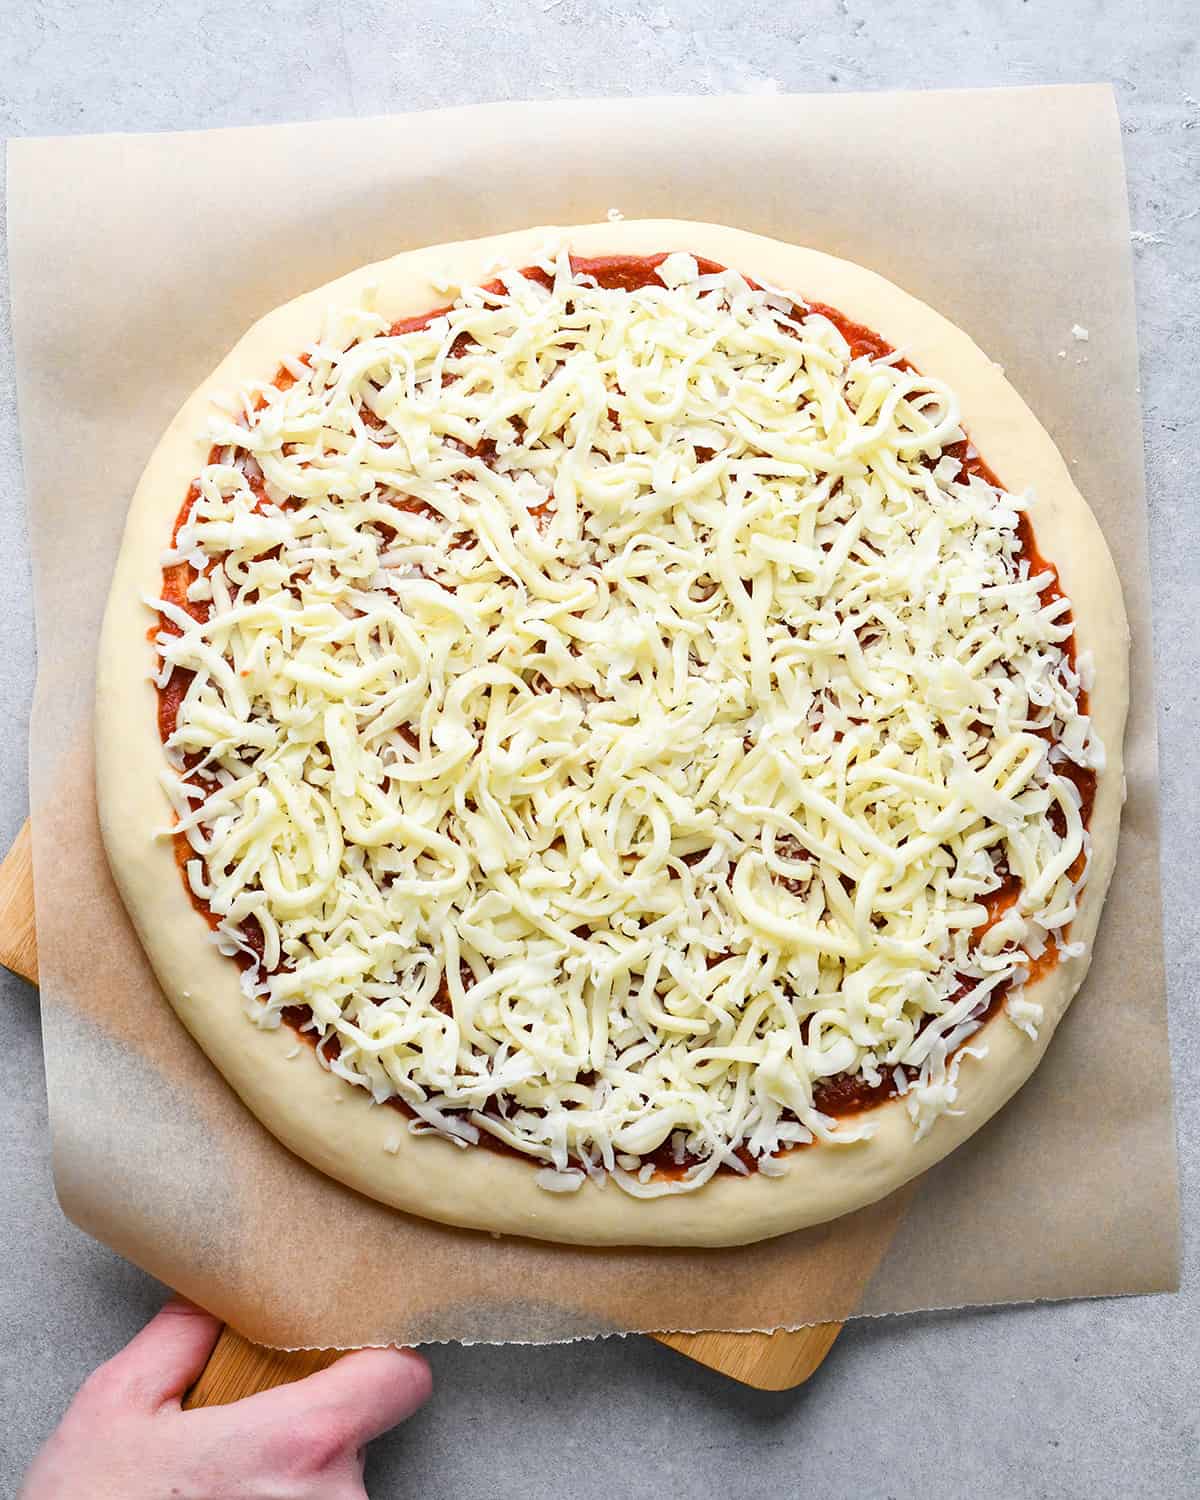 homemade pizza on a pizza peel before baking